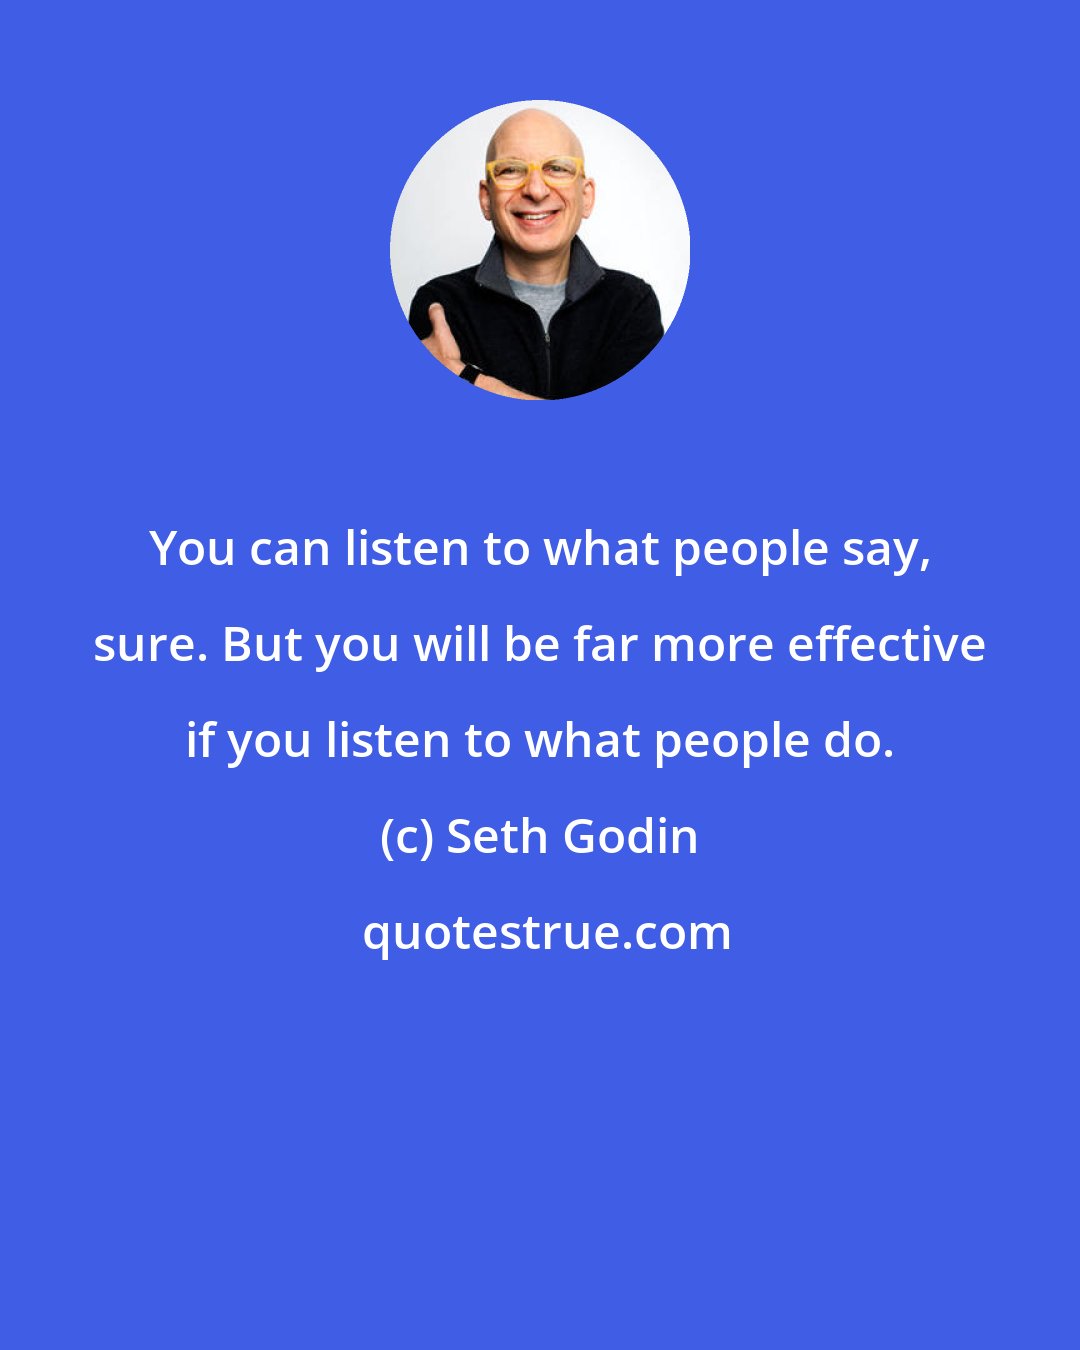 Seth Godin: You can listen to what people say, sure. But you will be far more effective if you listen to what people do.